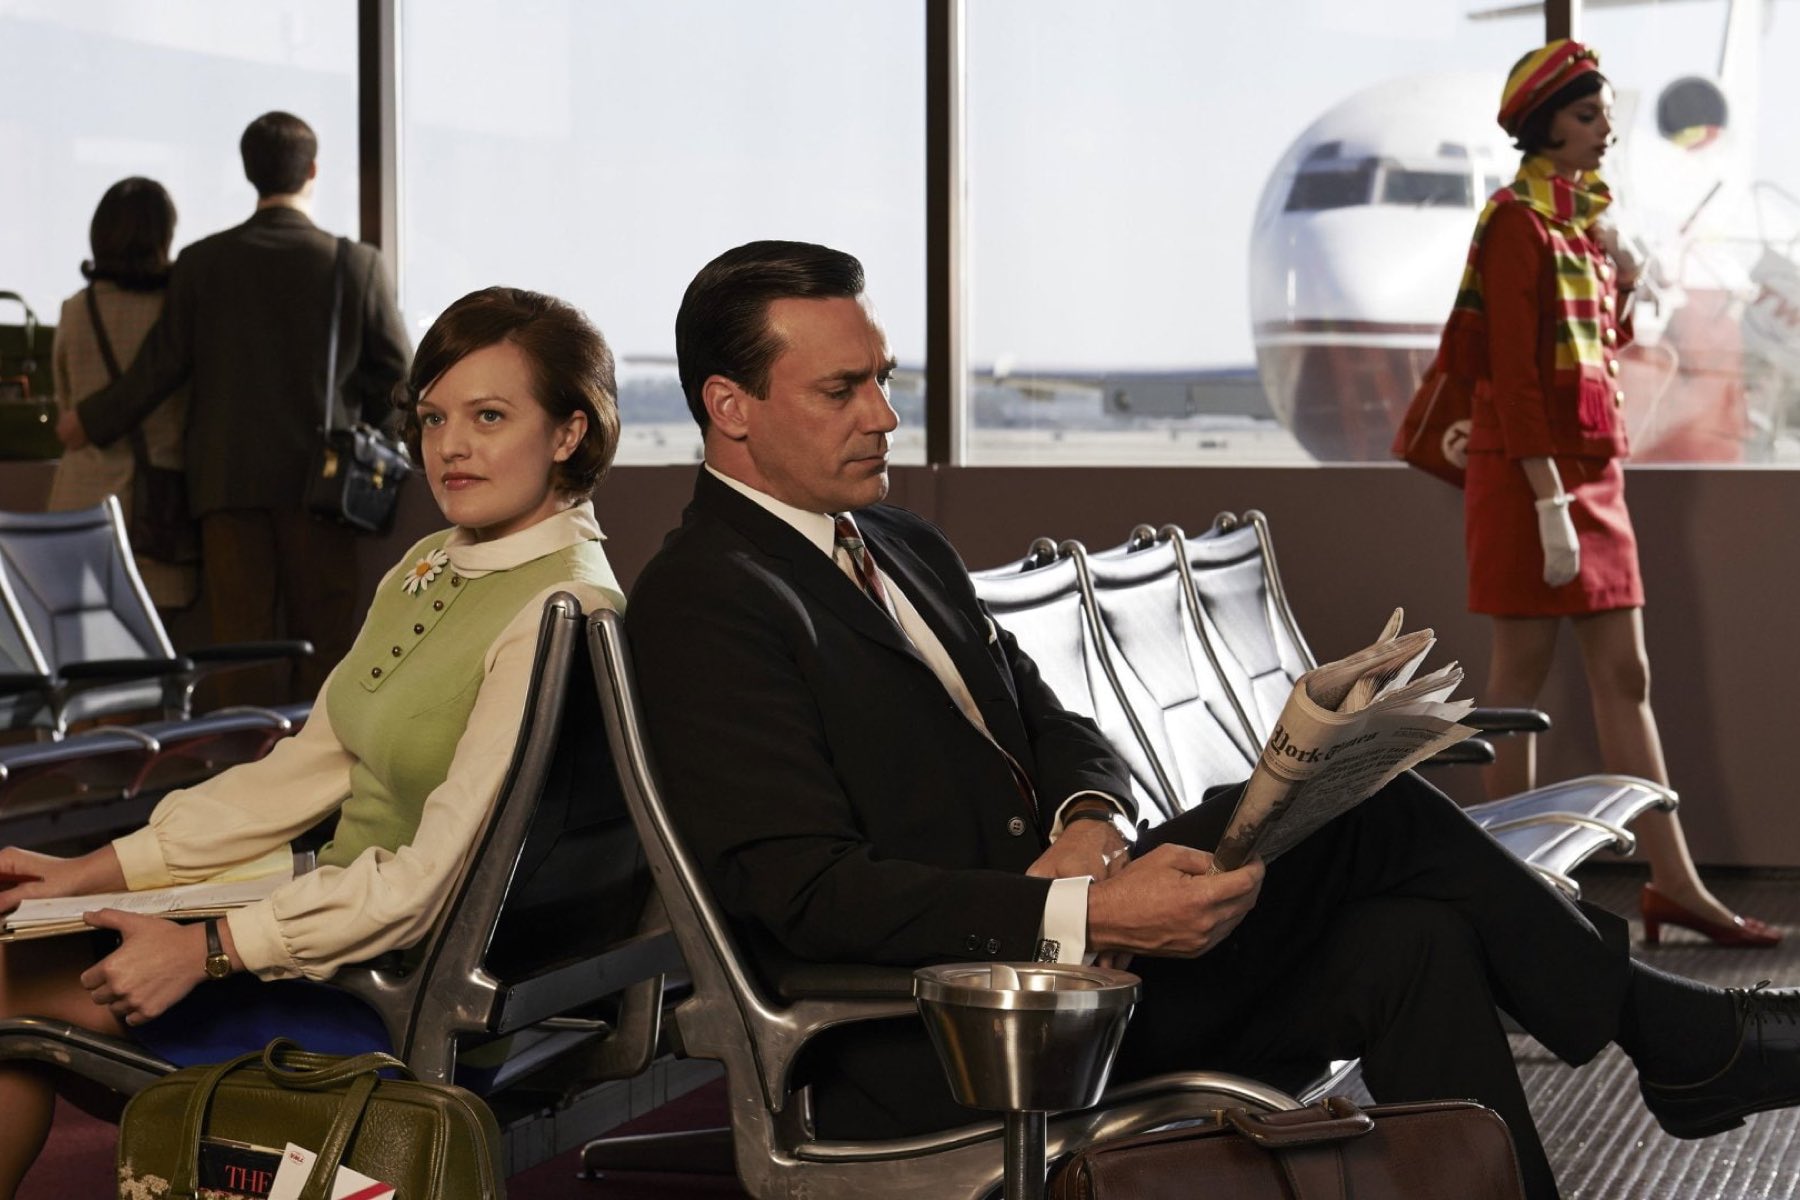 Mad Men: Peggy and Don in an airport